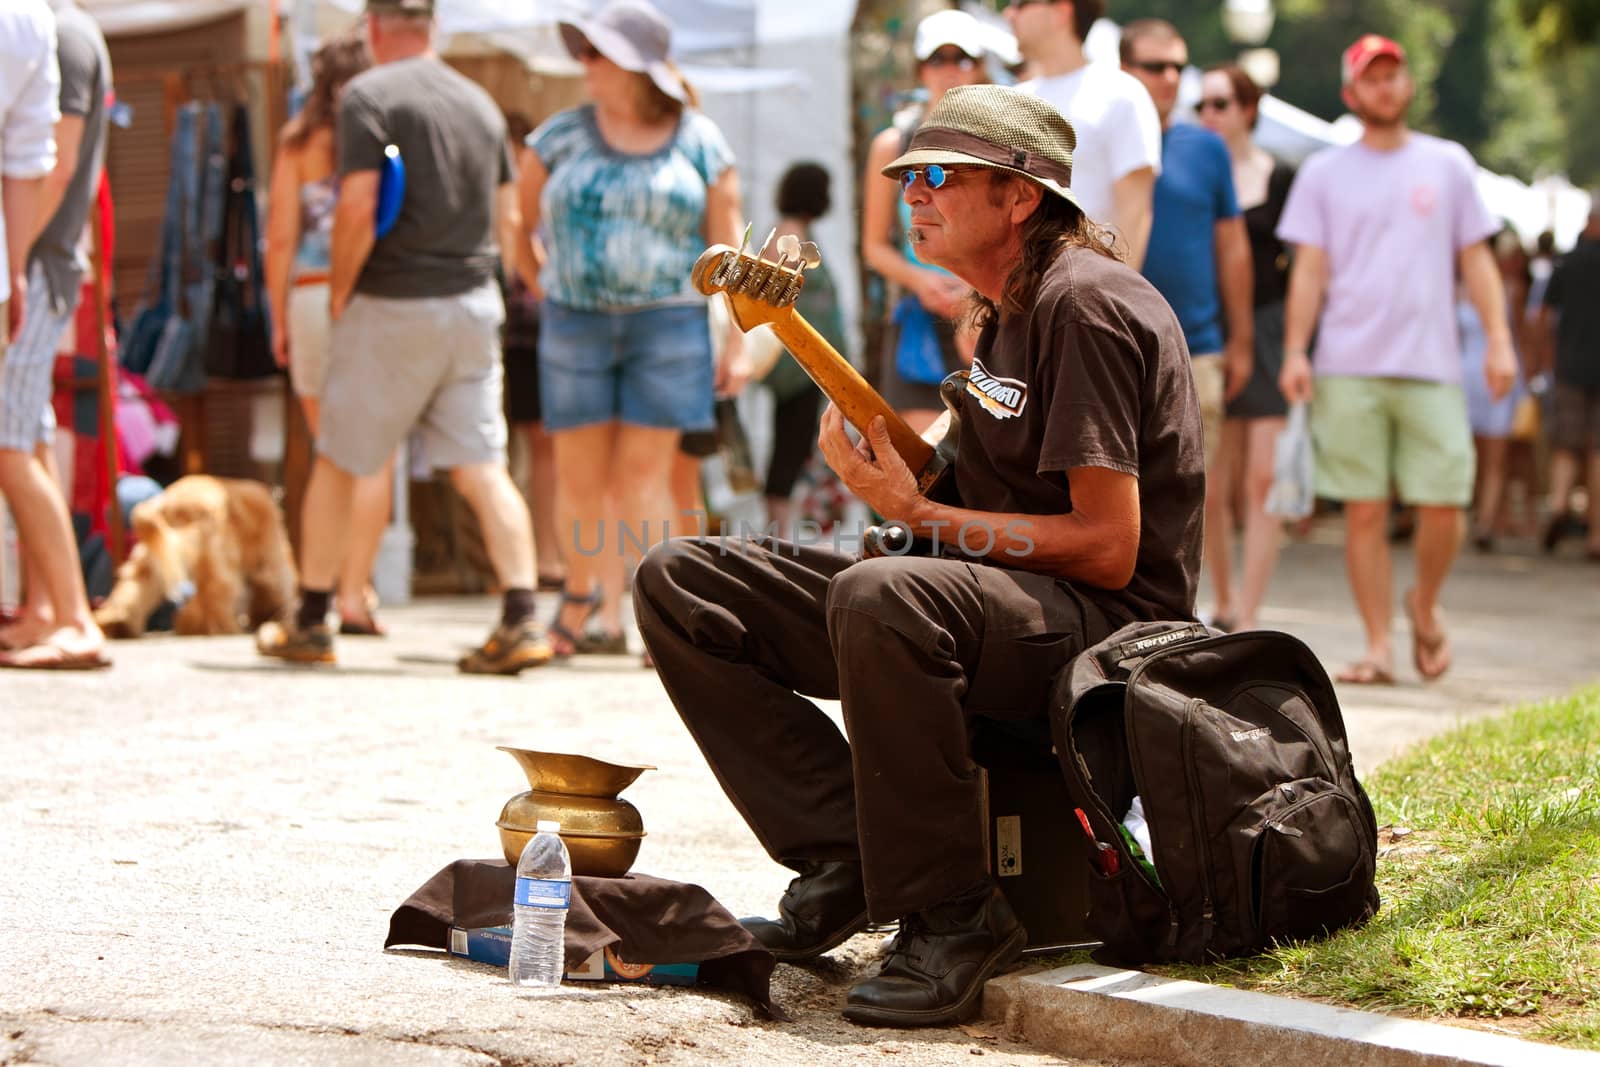 Man Plays Bass Guitar For Tips At Arts Festival by BluIz60